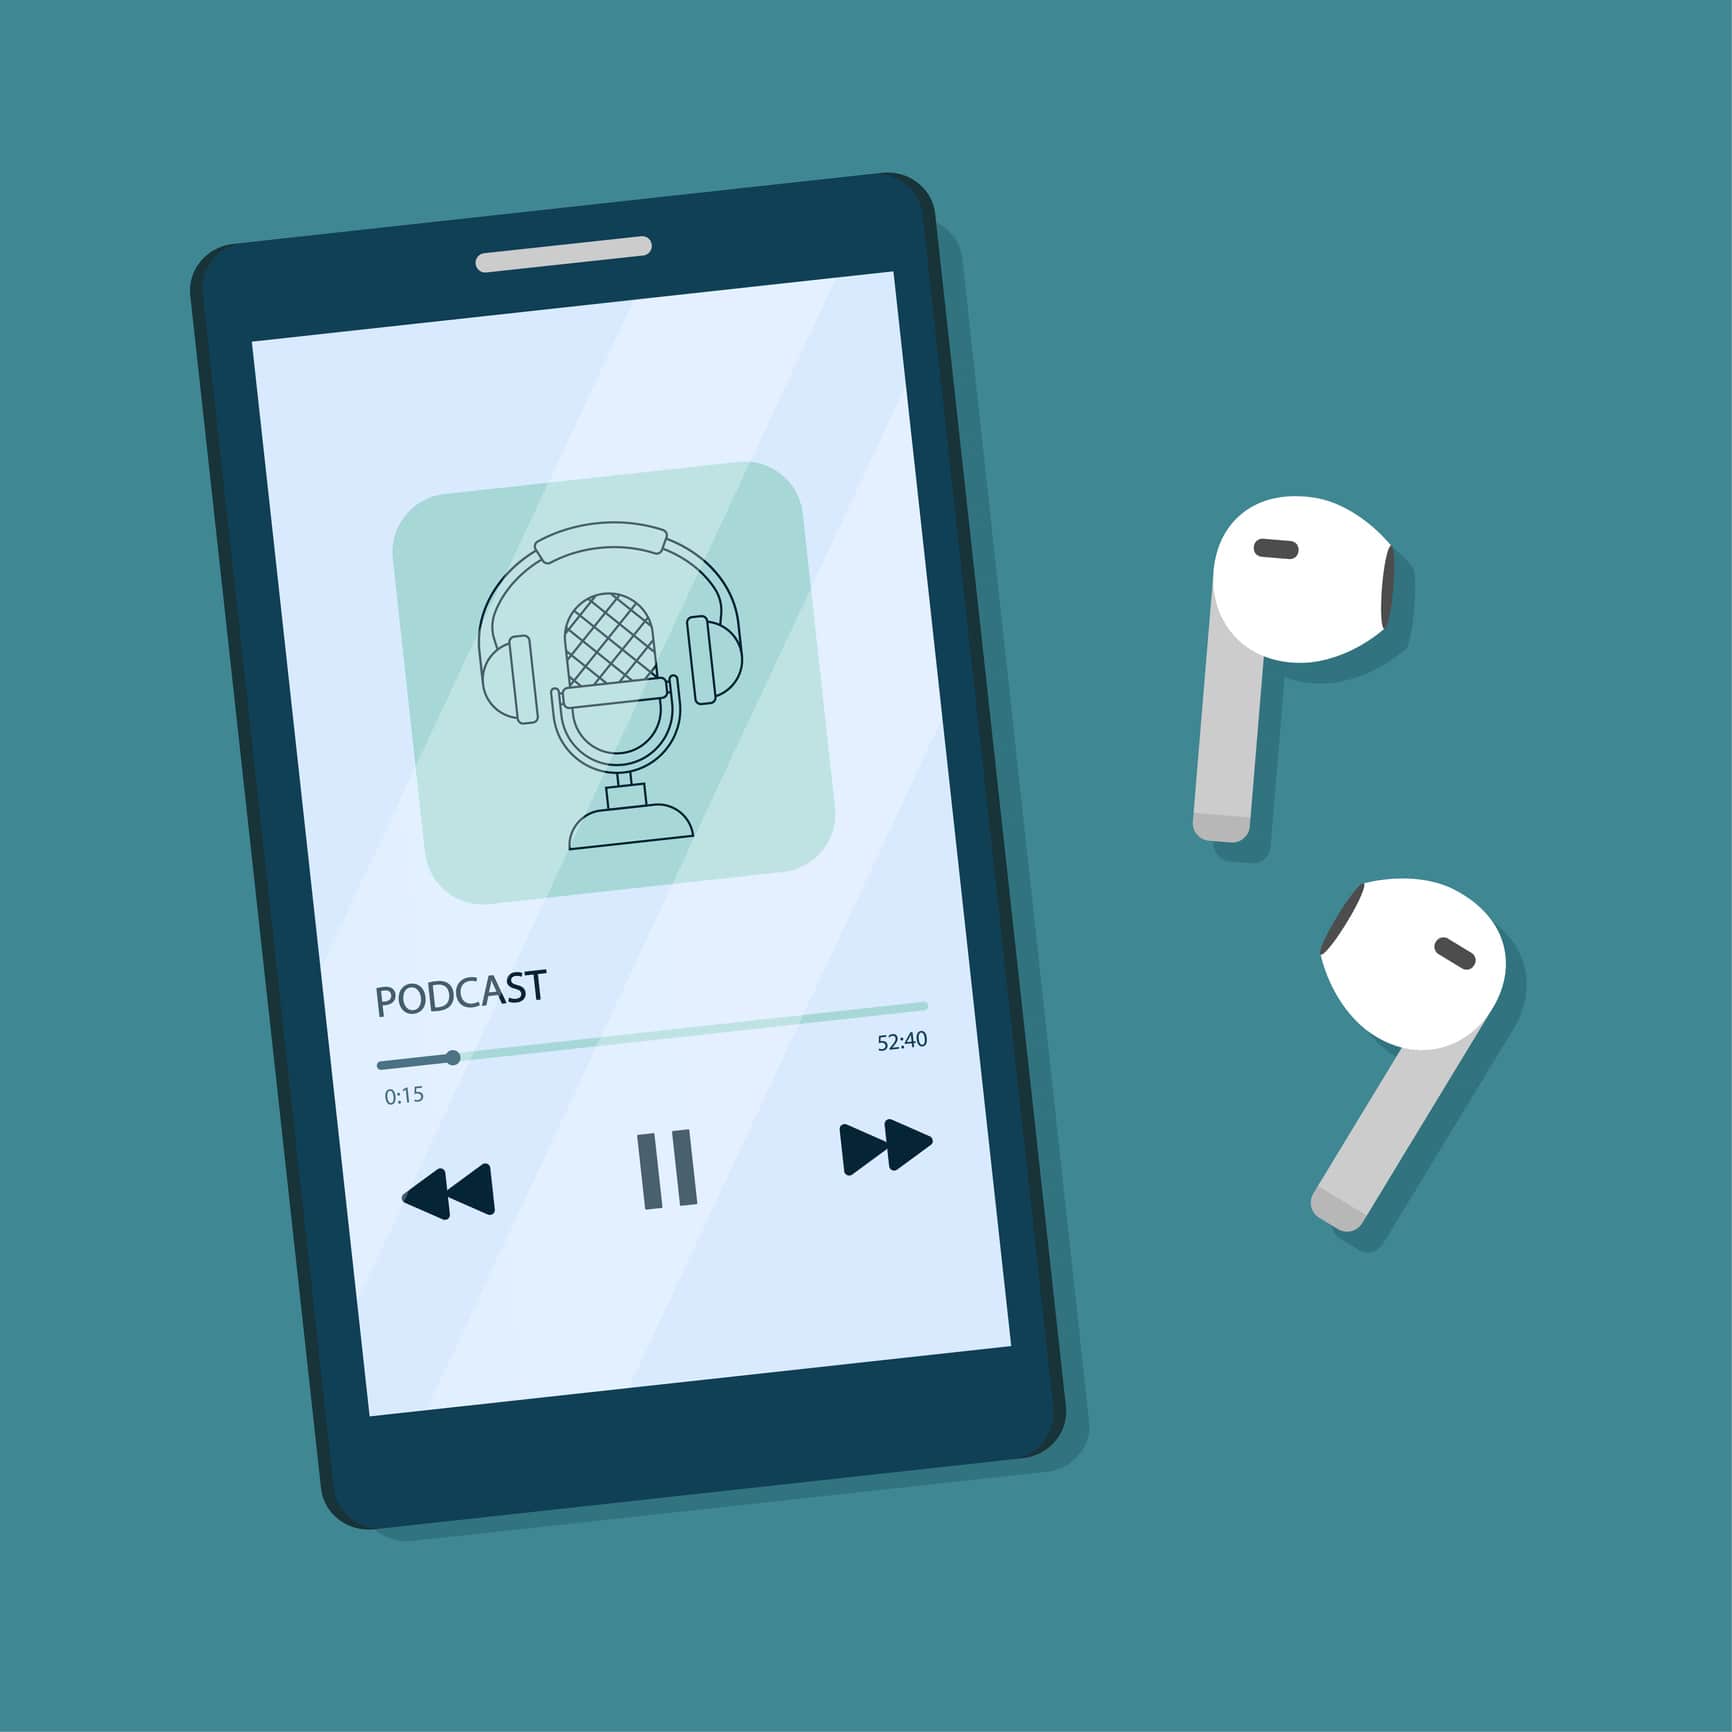 Listen Up! 6 of the Best Podcasts for Caregivers